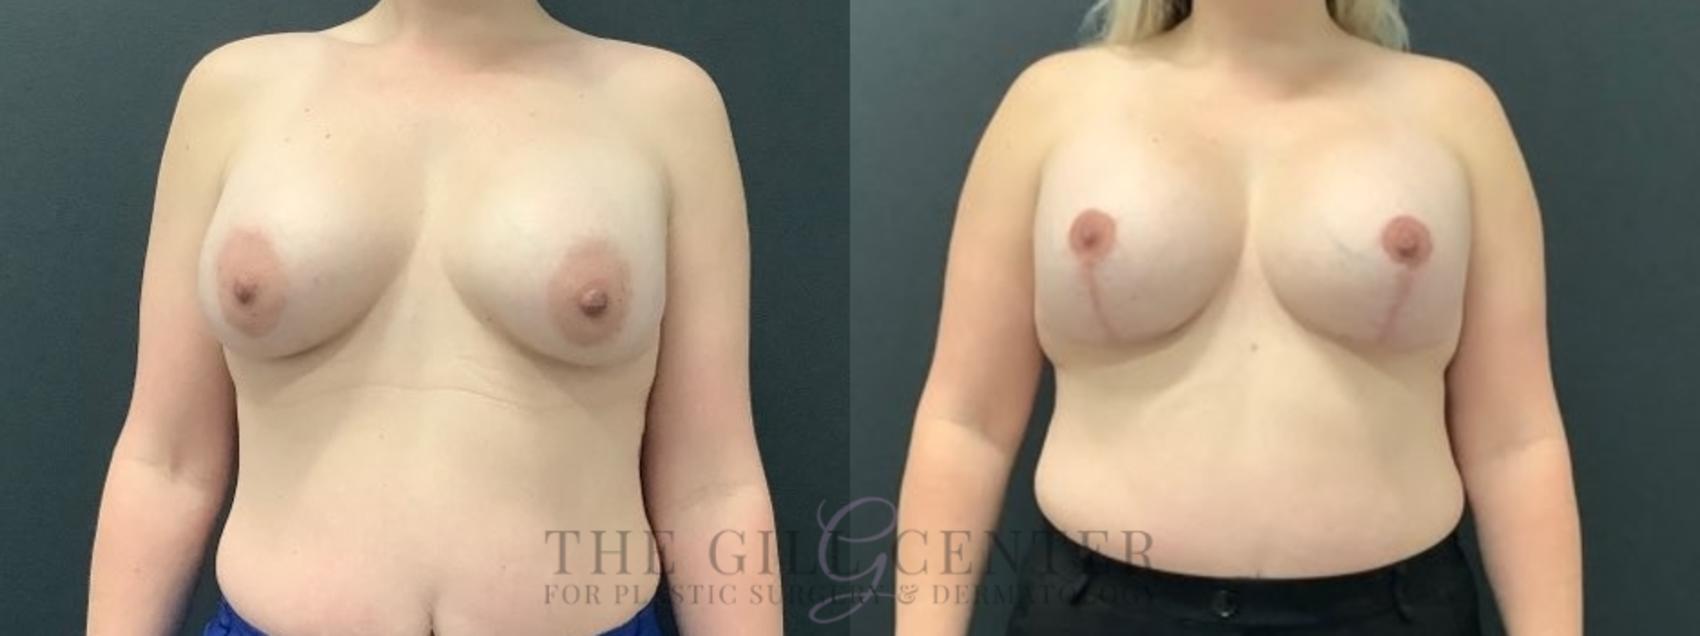 Breast Lift with Implants Case 639 Before & After Front | The Woodlands, TX | The Gill Center for Plastic Surgery and Dermatology